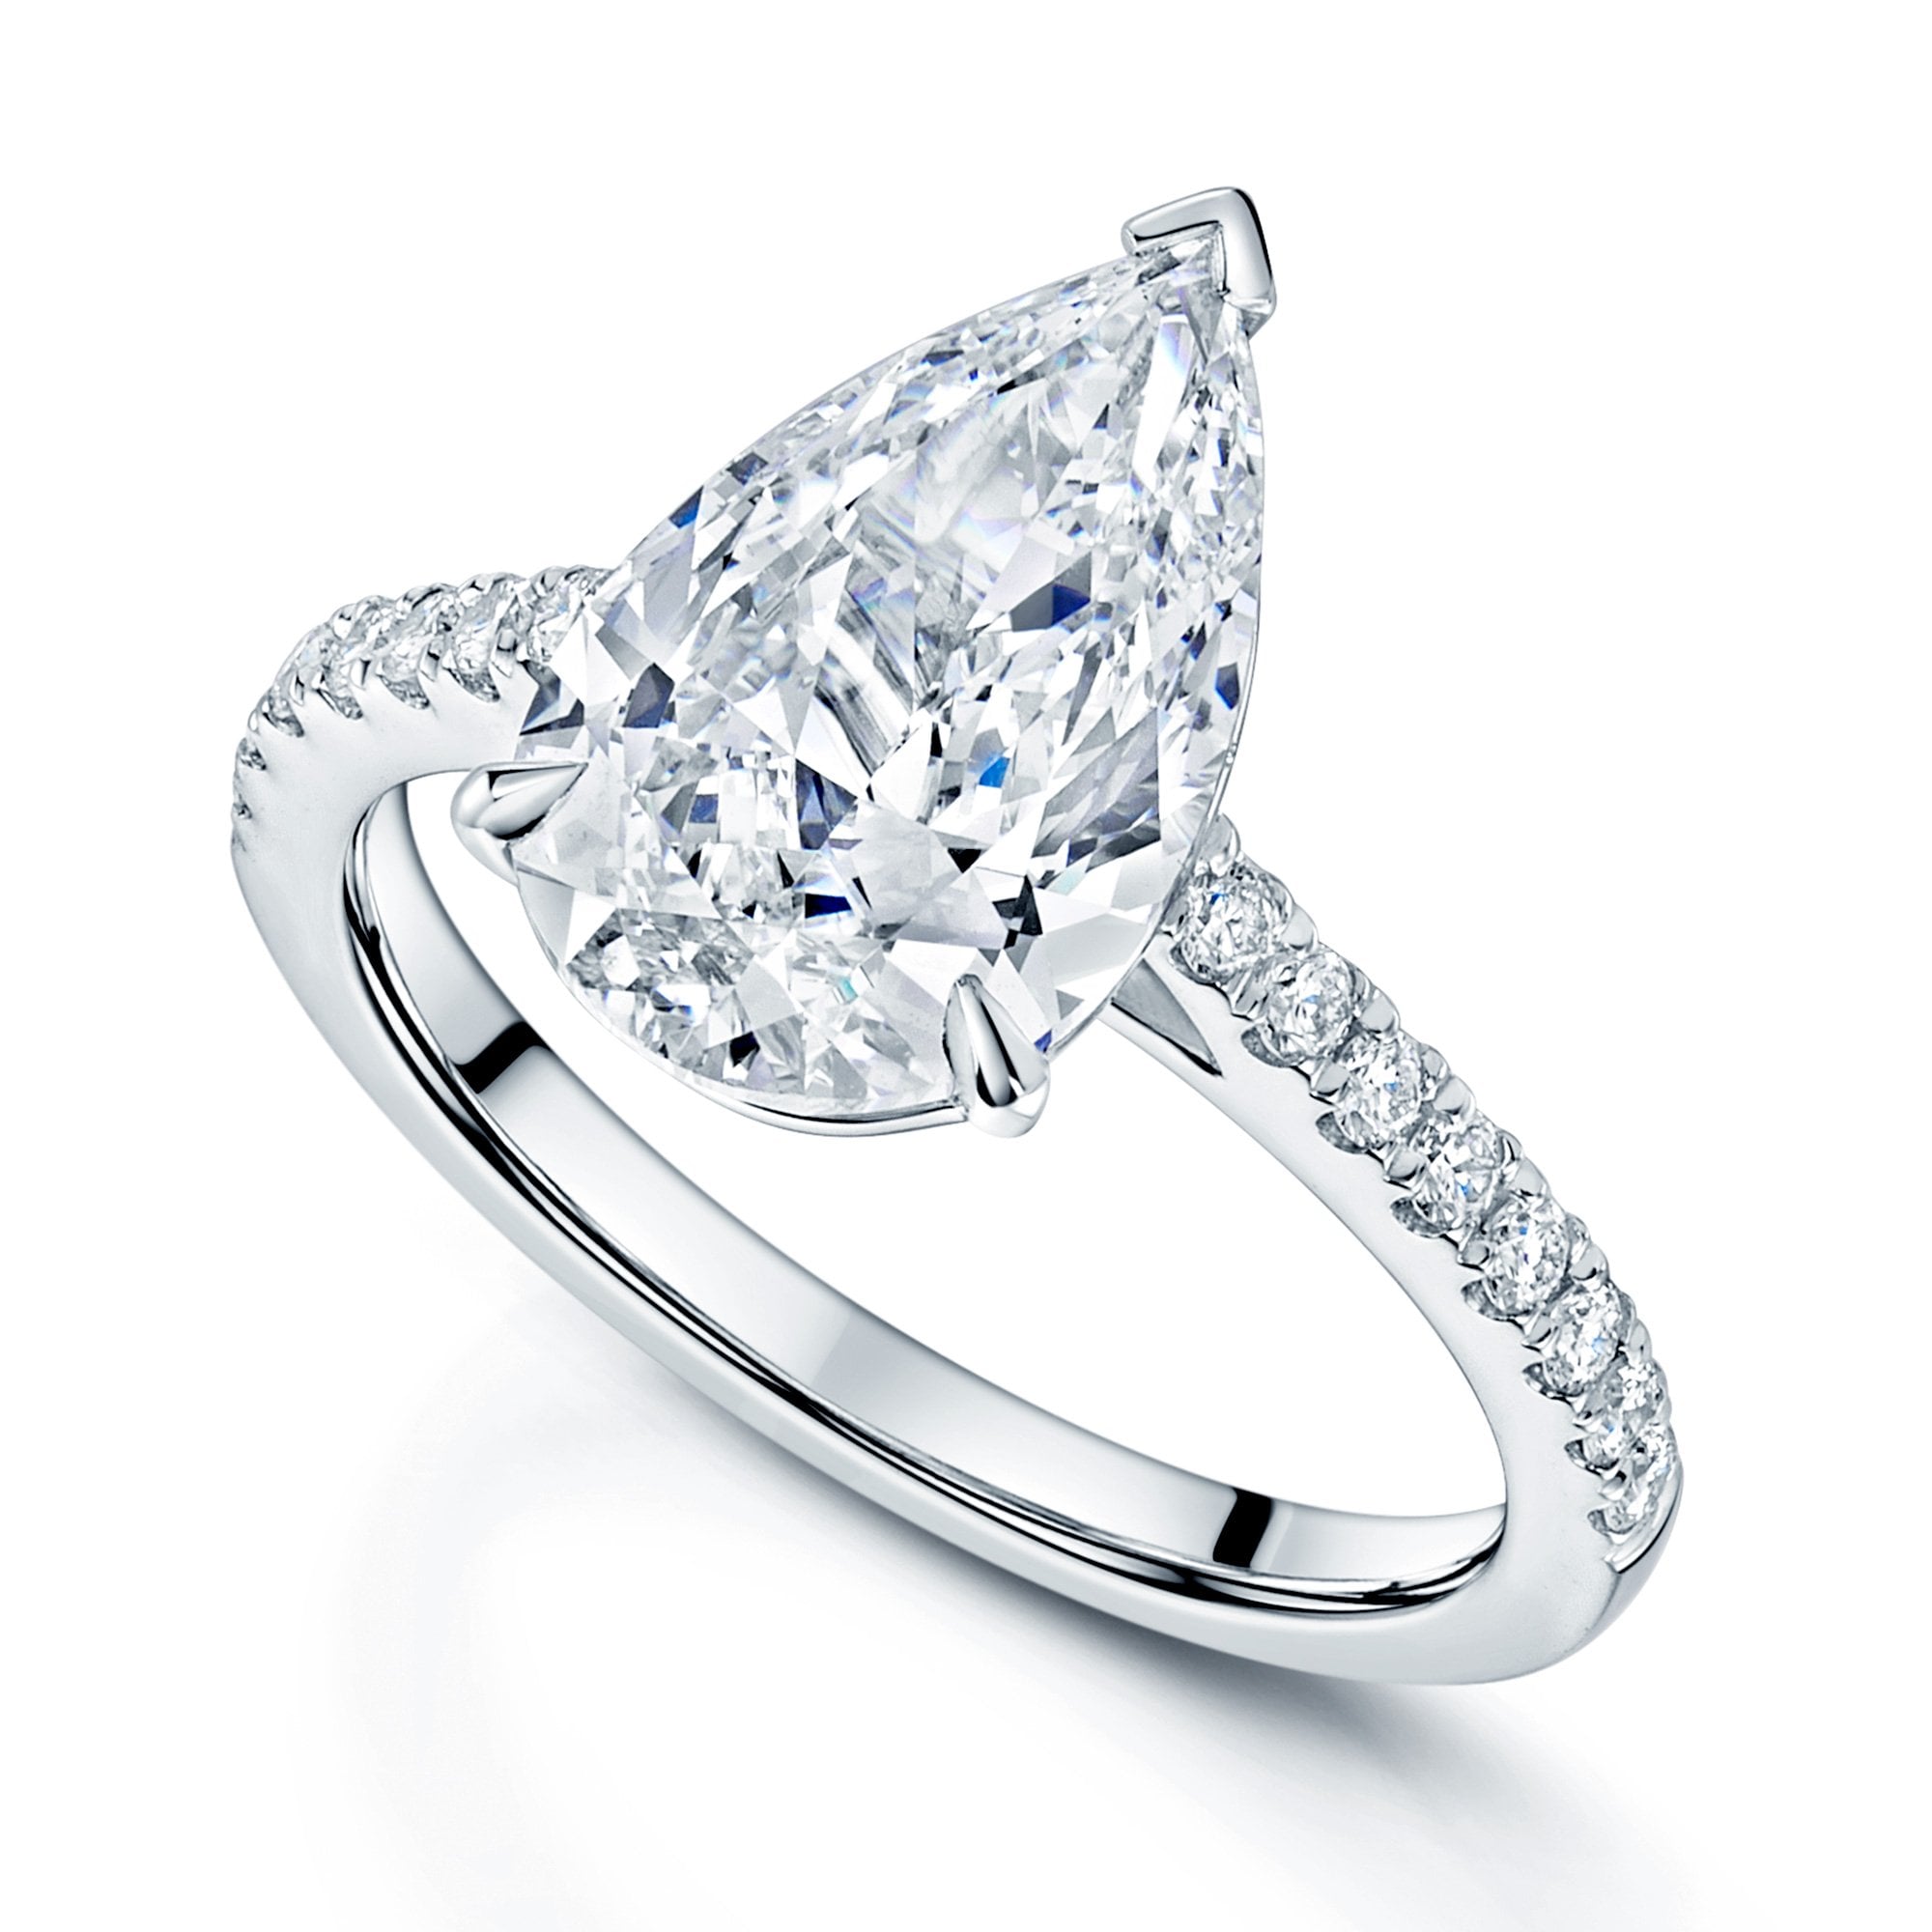 Platinum GIA Certificated Pear Cut Diamond Solitaire With Diamond Set Shoulders